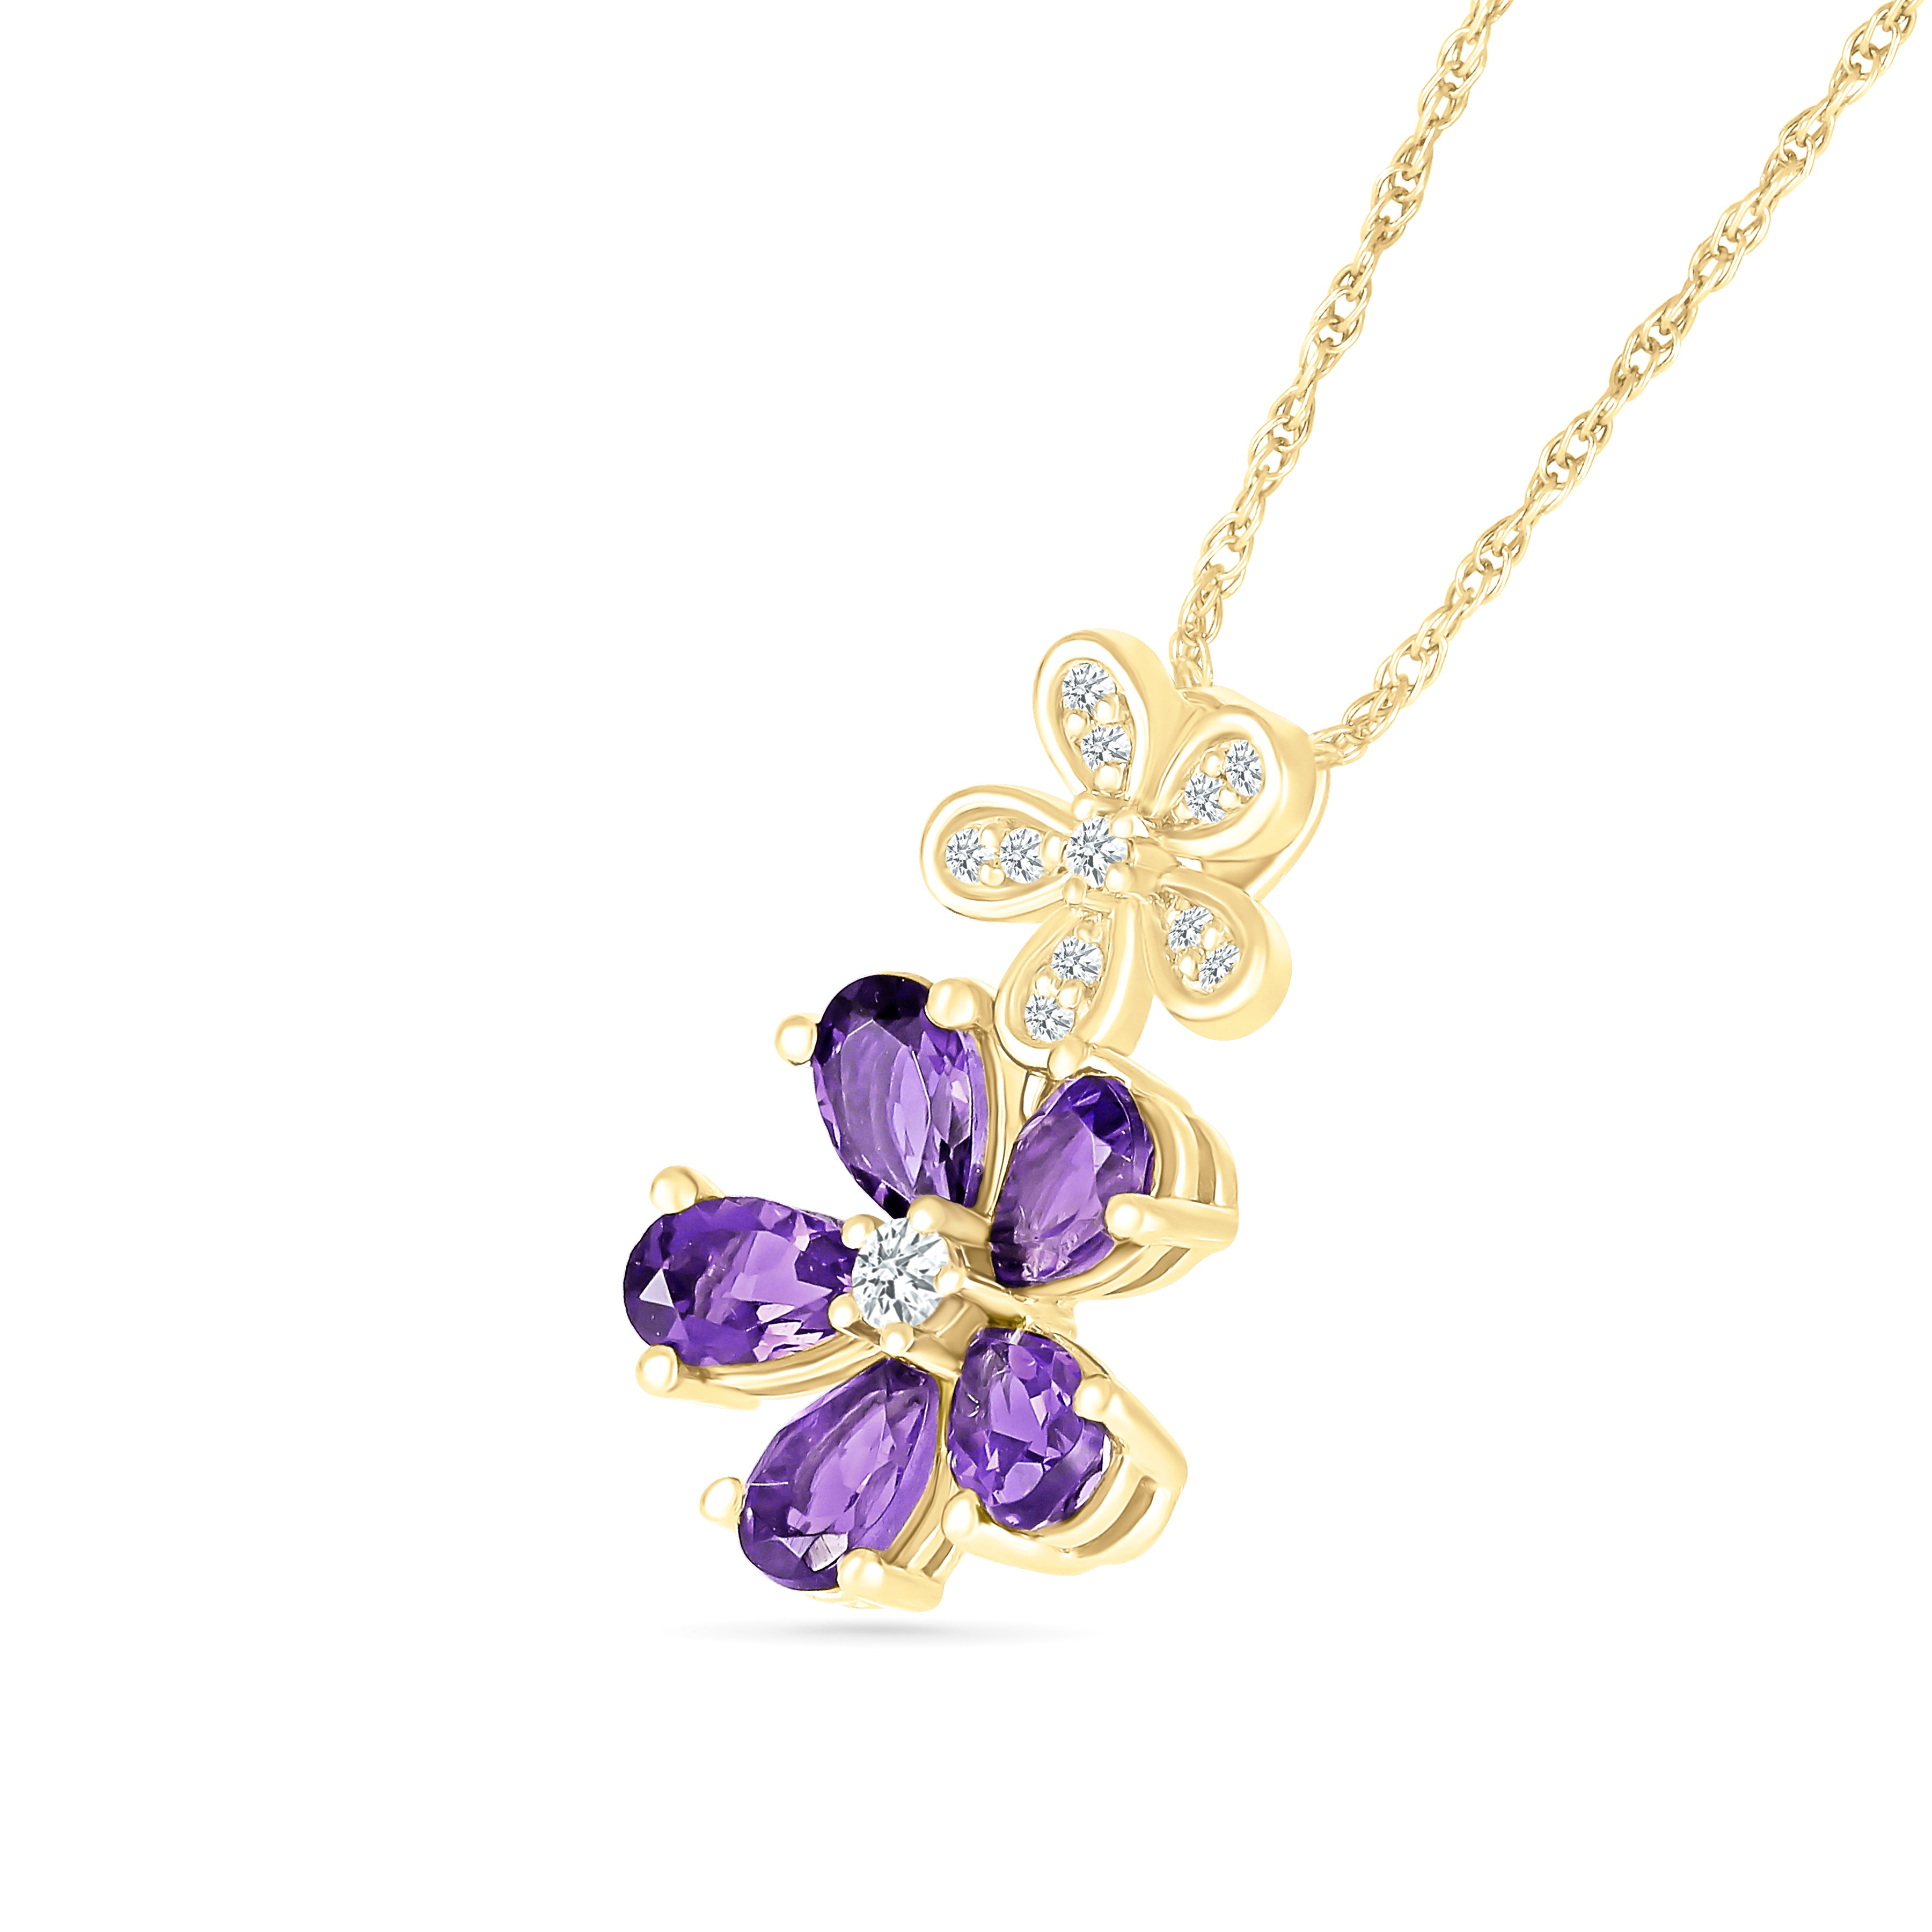 Double Flower Drop Pendant in Amethyst and White Sapphire Necklaces Estella Collection #product_description# 32733 10k Amethyst Birthstone #tag4# #tag5# #tag6# #tag7# #tag8# #tag9# #tag10#